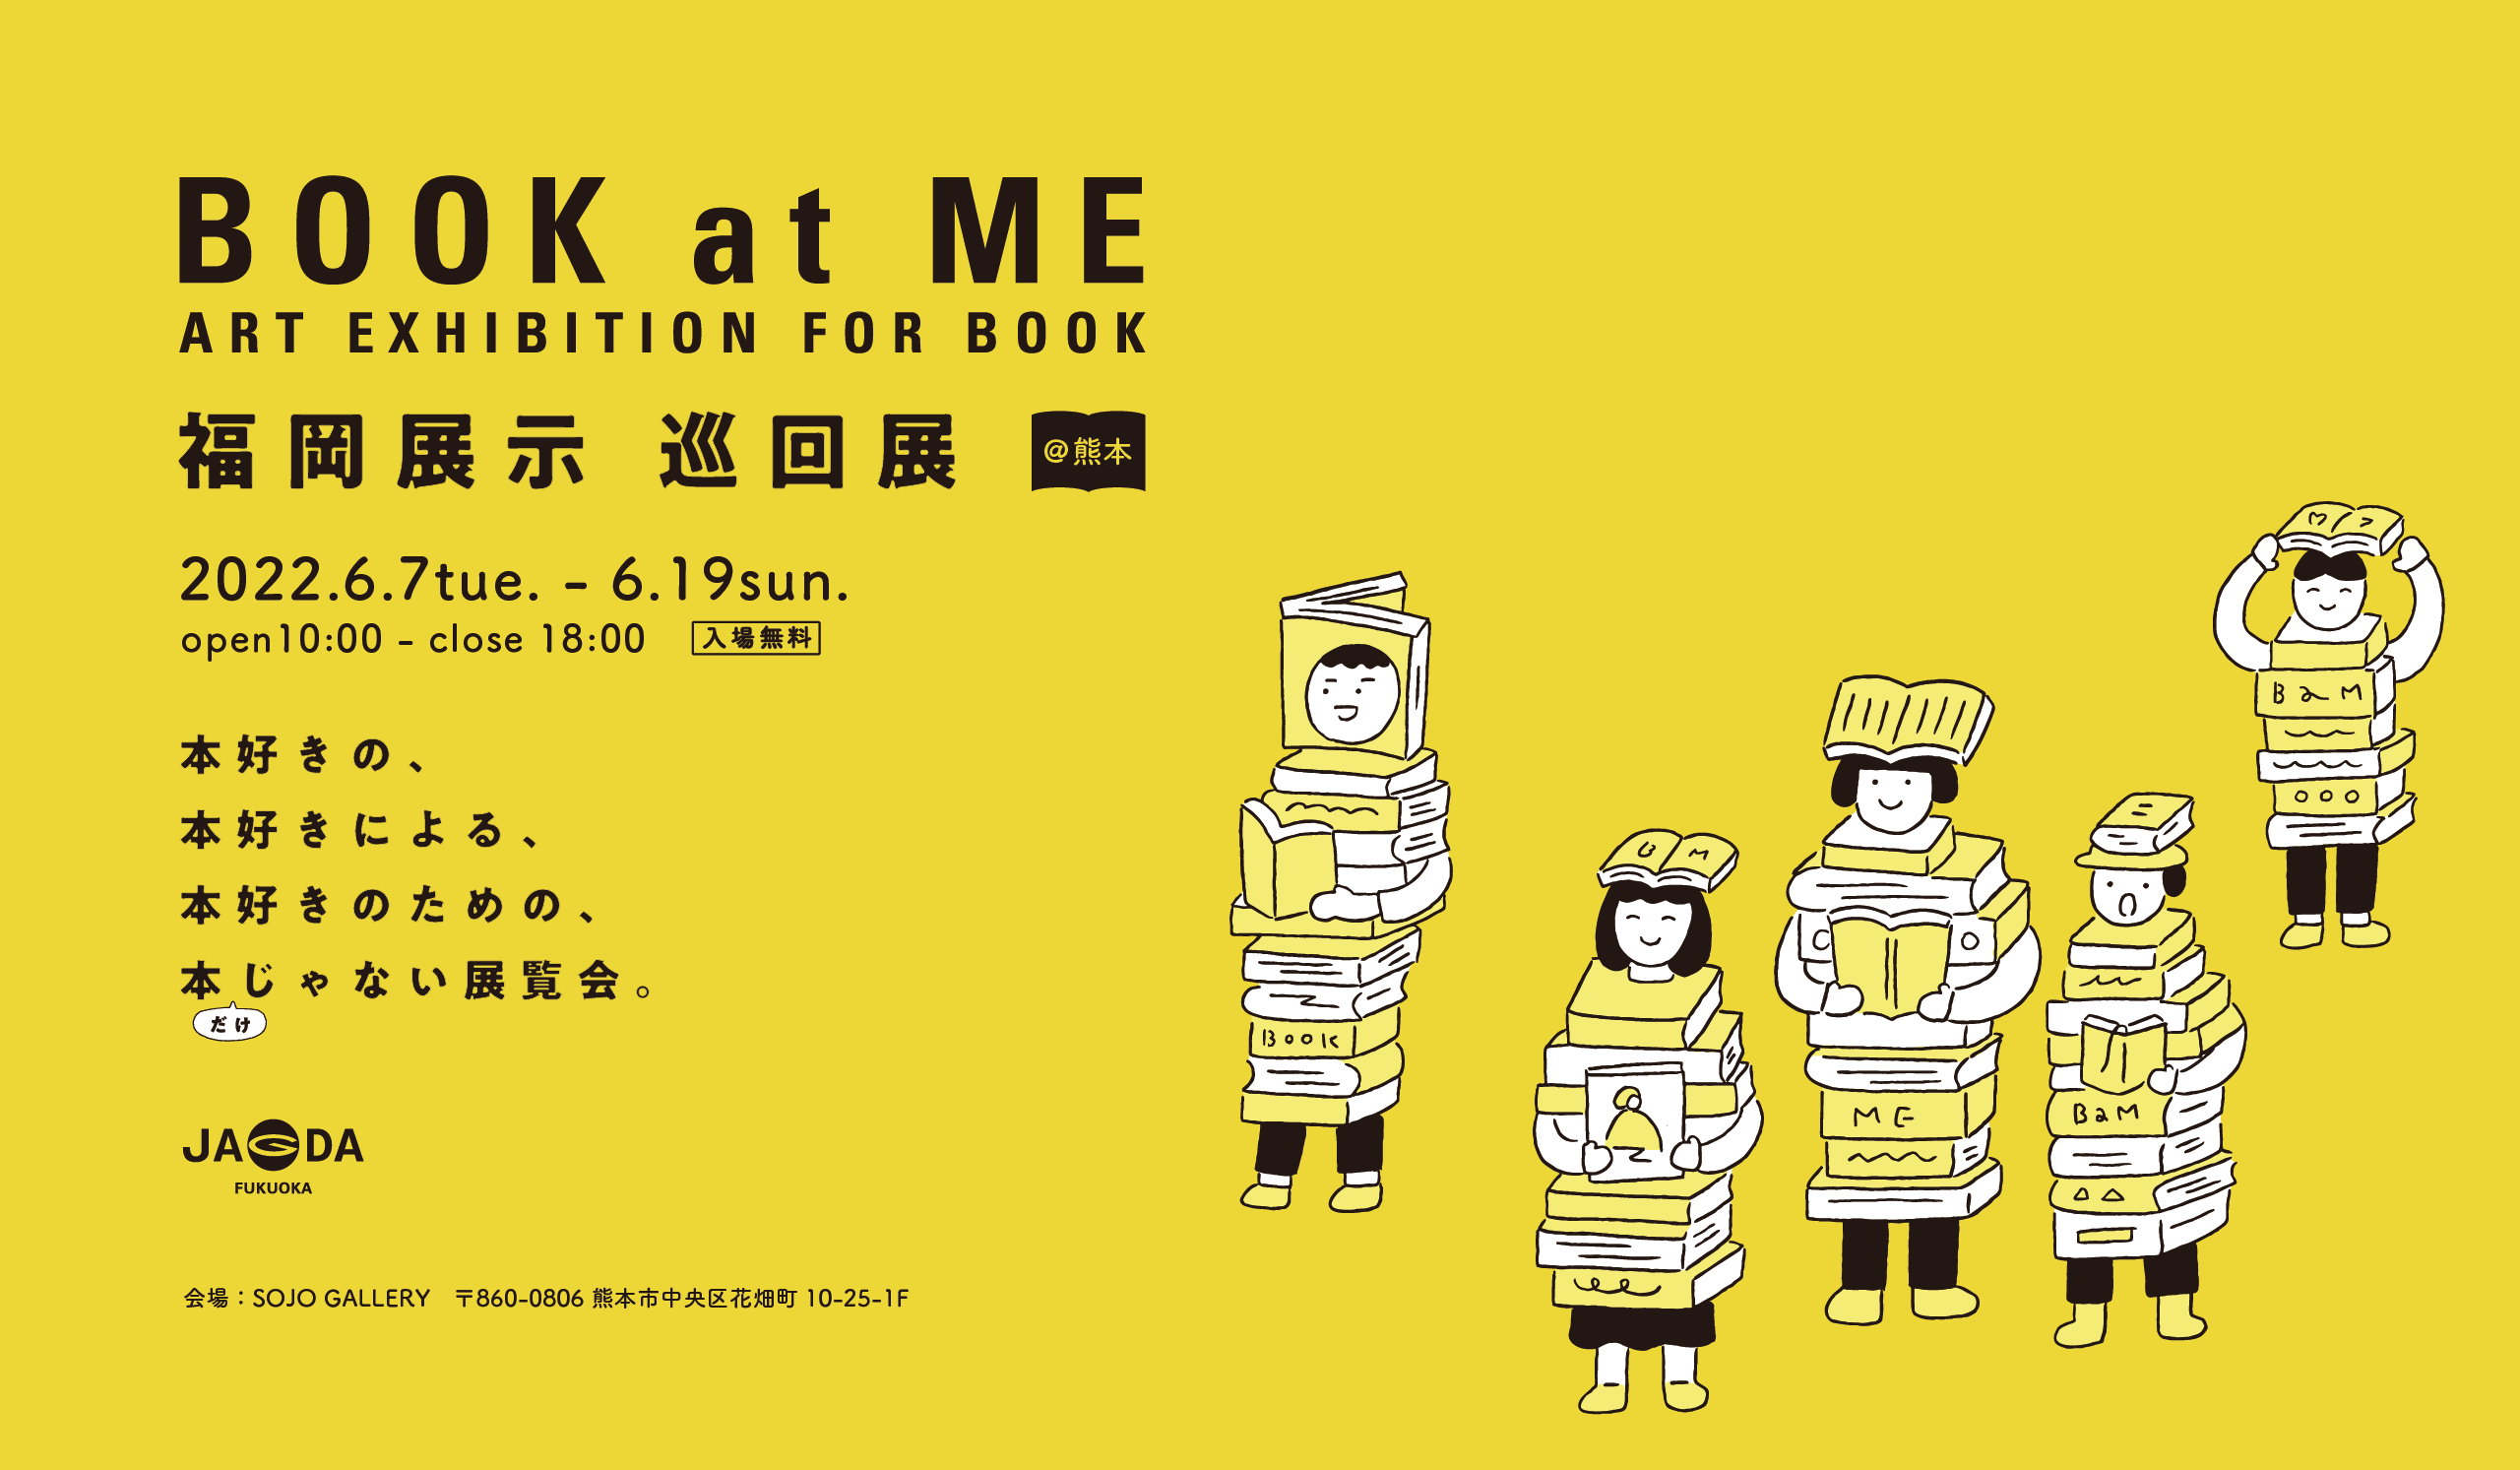 BOOKatME 福岡展示巡回展 in 熊本のバナーデザイン